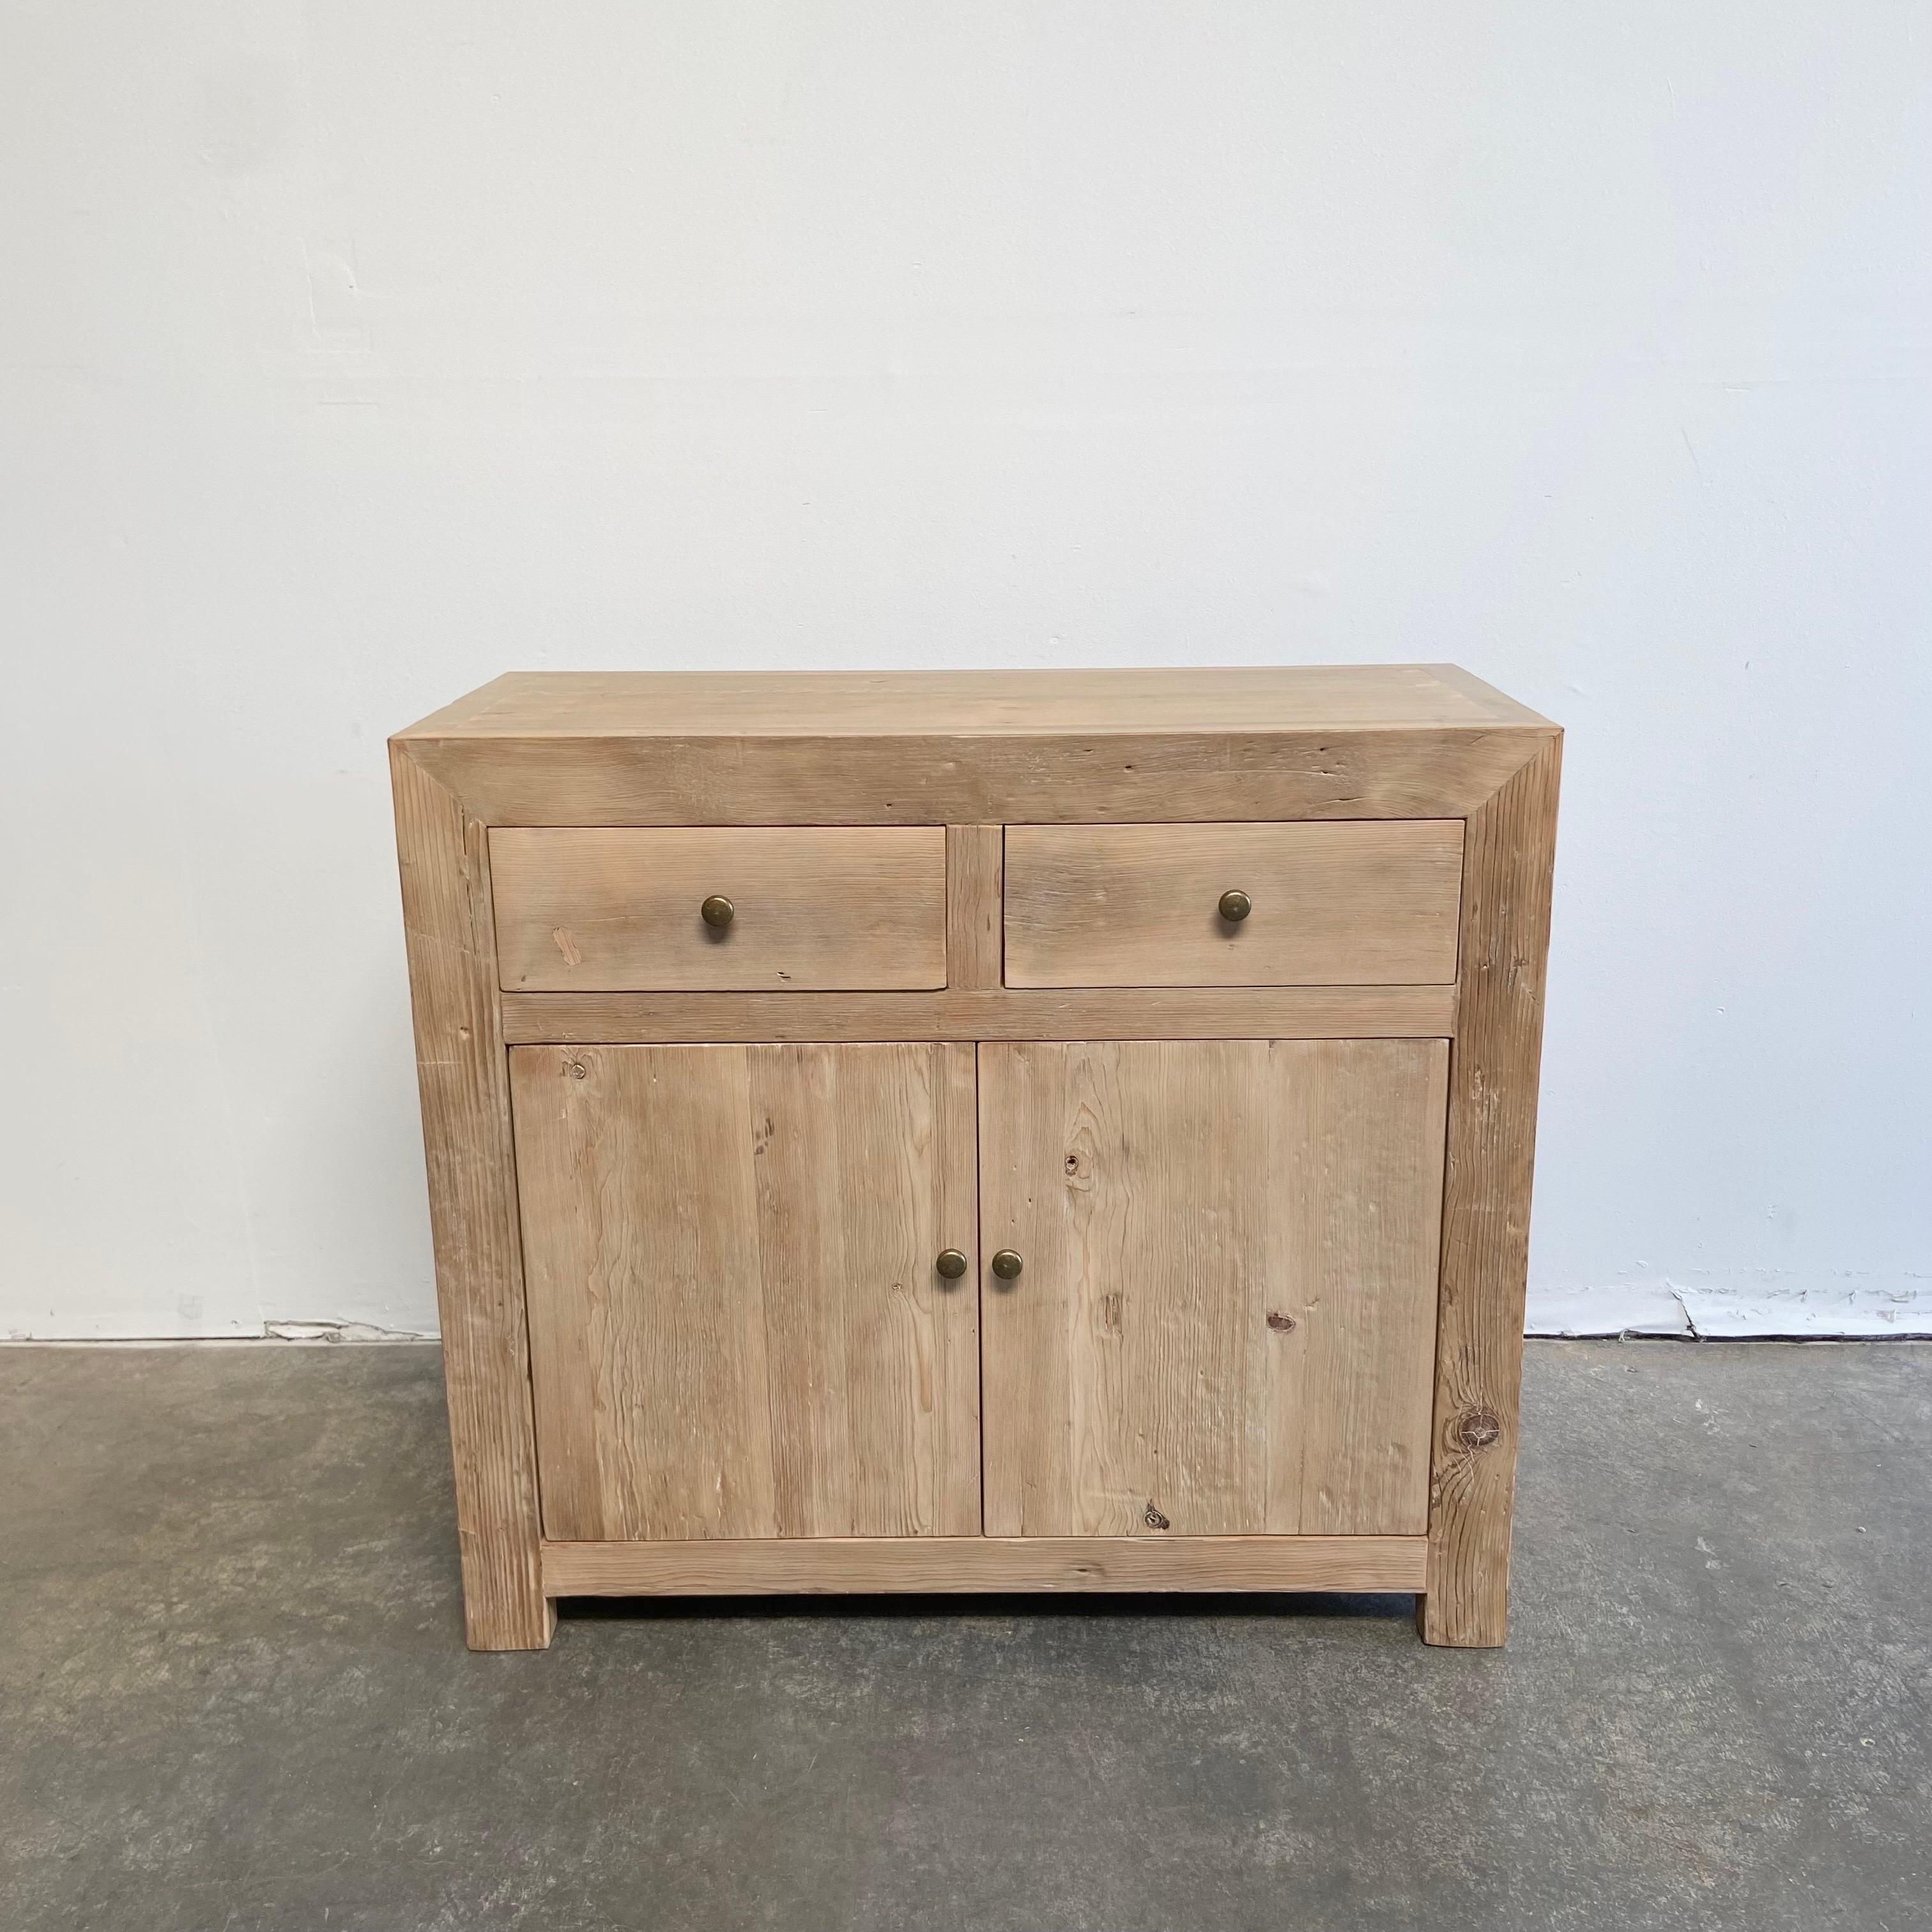 Elm commode 40”W x 17”D x 36”H
Inside:20”H x 38”W
Beautiful custom made elm wood cabinet with 2 doors and 2 drawers.
Perfect for entry, bedroom, dining room or any room in the house.
Doors open up to a shelf inside that can be removed. 2 working